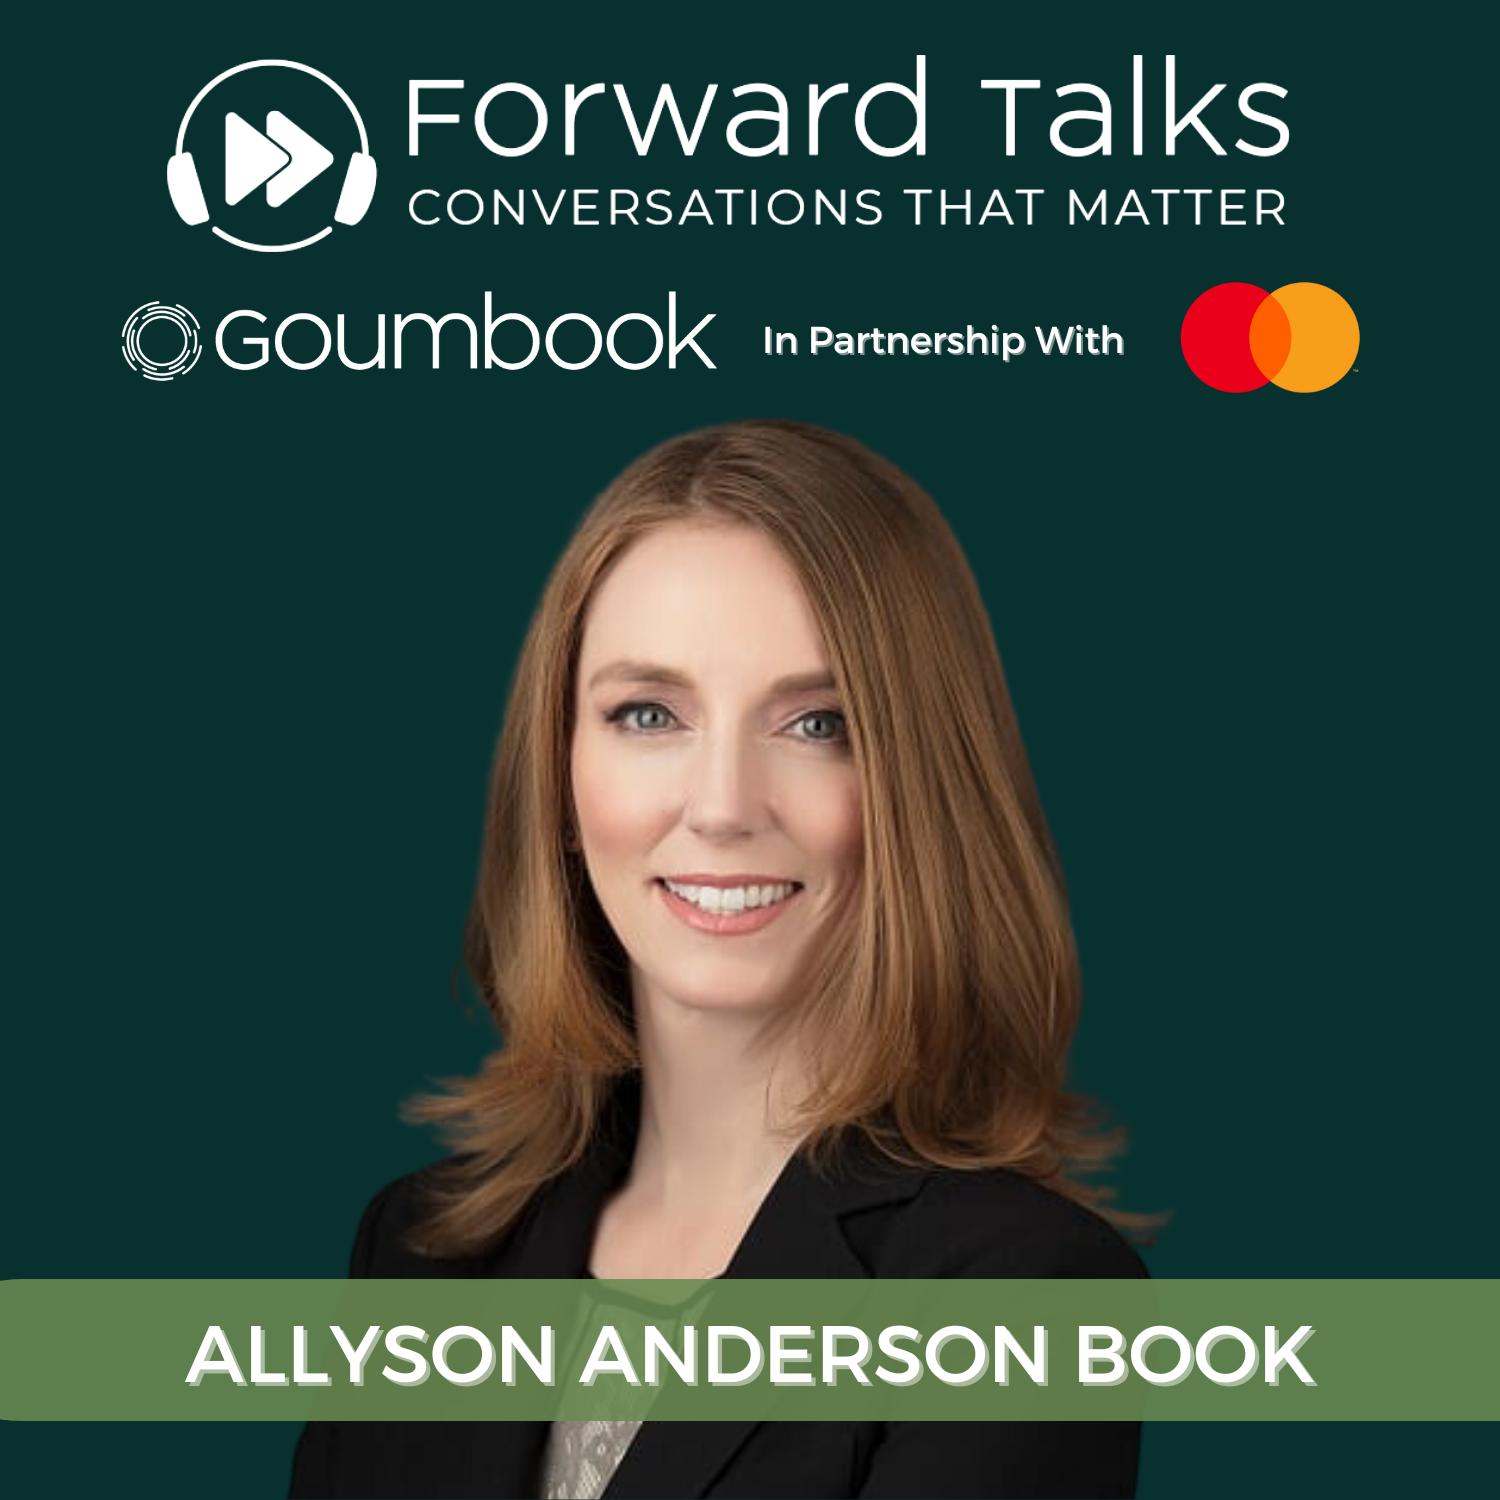 Allyson Anderson Book on the energy transition as an opportunity for innovation and collaboration